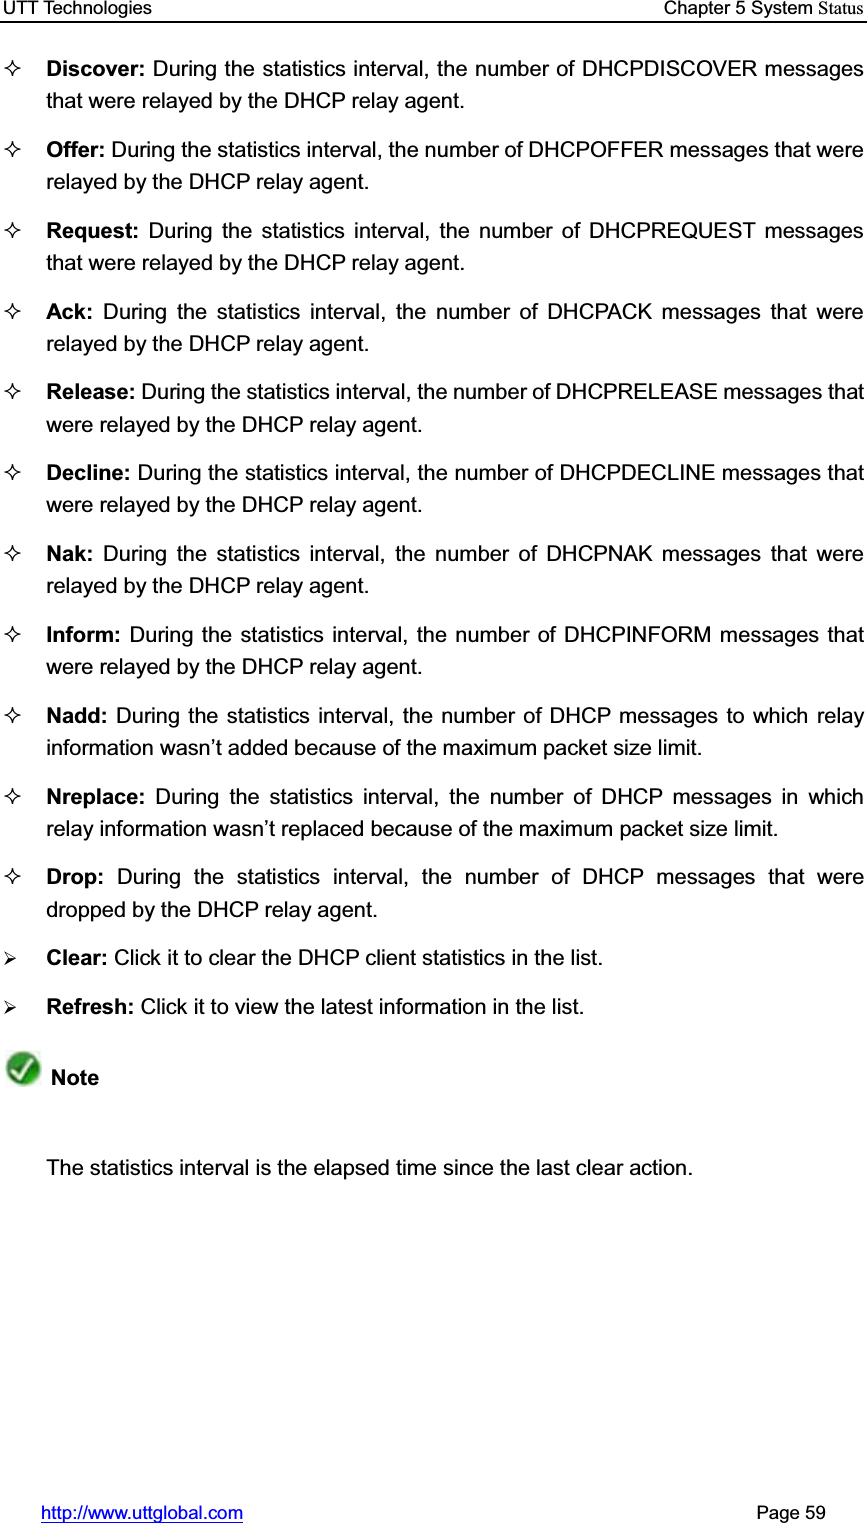 UTT Technologies    Chapter 5 System Statushttp://www.uttglobal.com                                                       Page 59 Discover: During the statistics interval, the number of DHCPDISCOVER messages that were relayed by the DHCP relay agent.   Offer: During the statistics interval, the number of DHCPOFFER messages that were relayed by the DHCP relay agent. Request: During the statistics interval, the number of DHCPREQUEST messages that were relayed by the DHCP relay agent. Ack:  During the statistics interval, the number of DHCPACK messages that were relayed by the DHCP relay agent. Release: During the statistics interval, the number of DHCPRELEASE messages that were relayed by the DHCP relay agent. Decline: During the statistics interval, the number of DHCPDECLINE messages that were relayed by the DHCP relay agent. Nak:  During the statistics interval, the number of DHCPNAK messages that were relayed by the DHCP relay agent. Inform: During the statistics interval, the number of DHCPINFORM messages that were relayed by the DHCP relay agent. Nadd: During the statistics interval, the number of DHCP messages to which relay information wasn¶t added because of the maximum packet size limit.Nreplace: During the statistics interval, the number of DHCP messages in which relay information wasn¶t replaced because of the maximum packet size limit.Drop: During the statistics interval, the number of DHCP messages that were dropped by the DHCP relay agent.¾Clear: Click it to clear the DHCP client statistics in the list.¾Refresh: Click it to view the latest information in the list.NoteThe statistics interval is the elapsed time since the last clear action. 